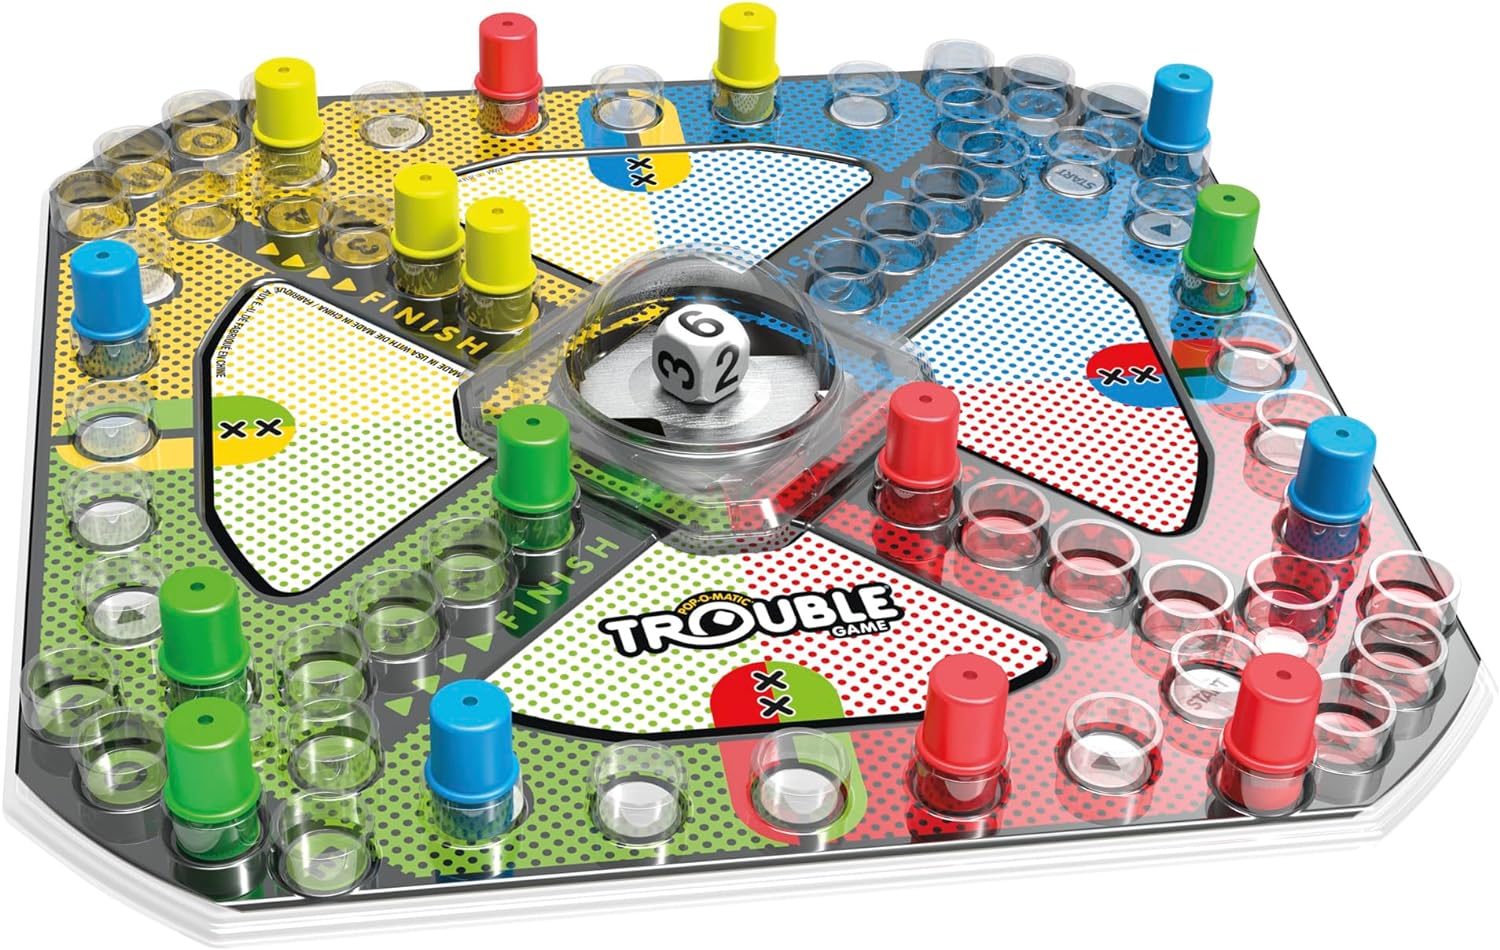 You are currently viewing Hasbro Gaming Trouble Board Game review